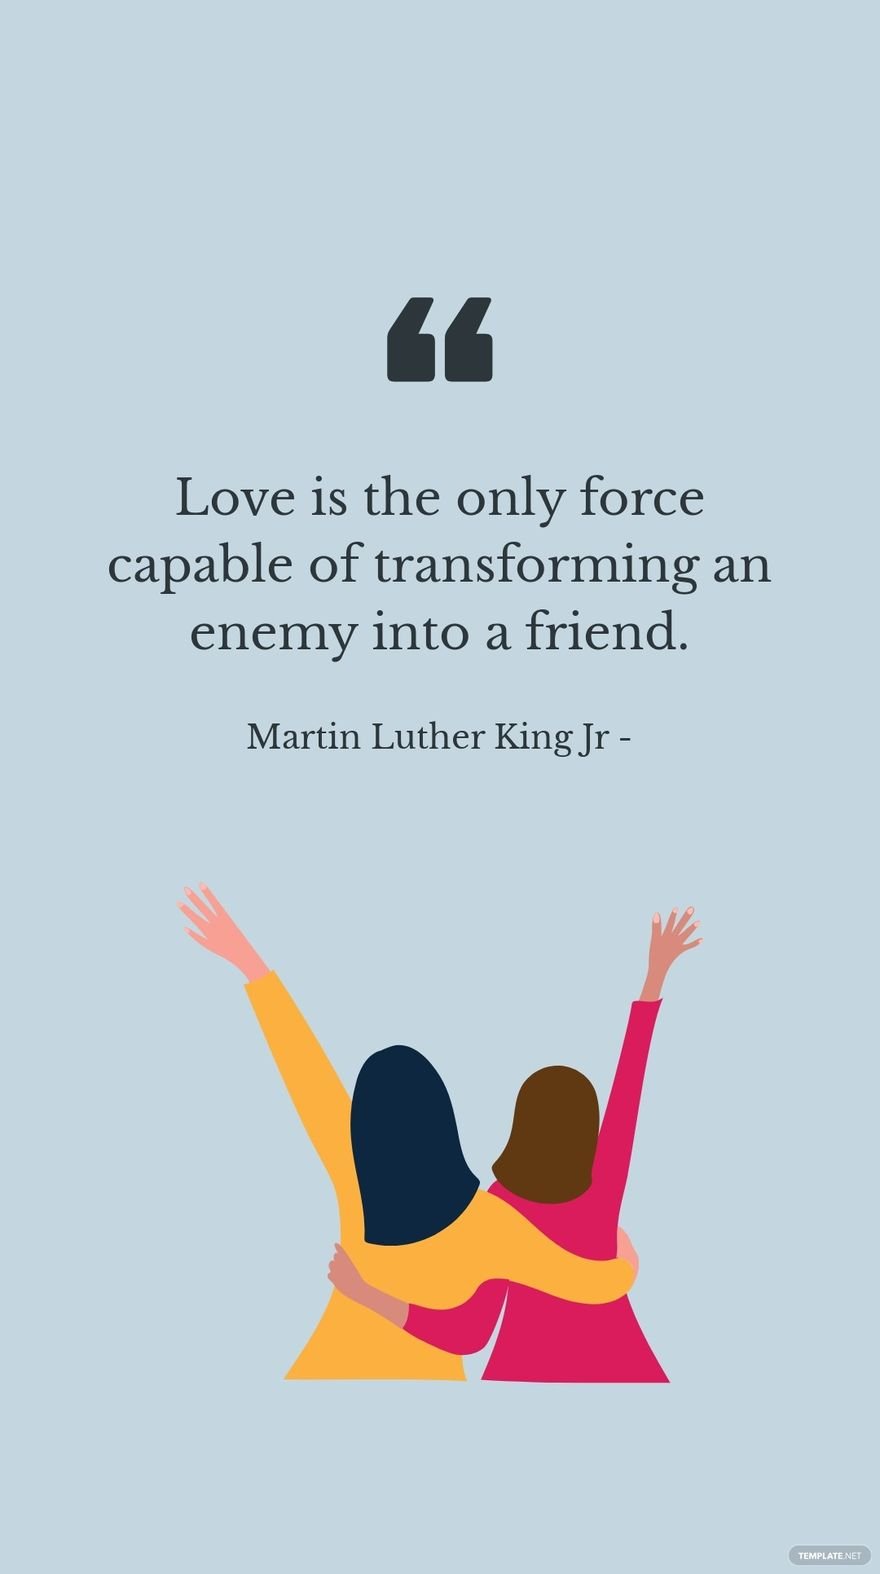 Martin Luther King, Jr - Love is the only force capable of transforming an enemy into a friend. in JPG